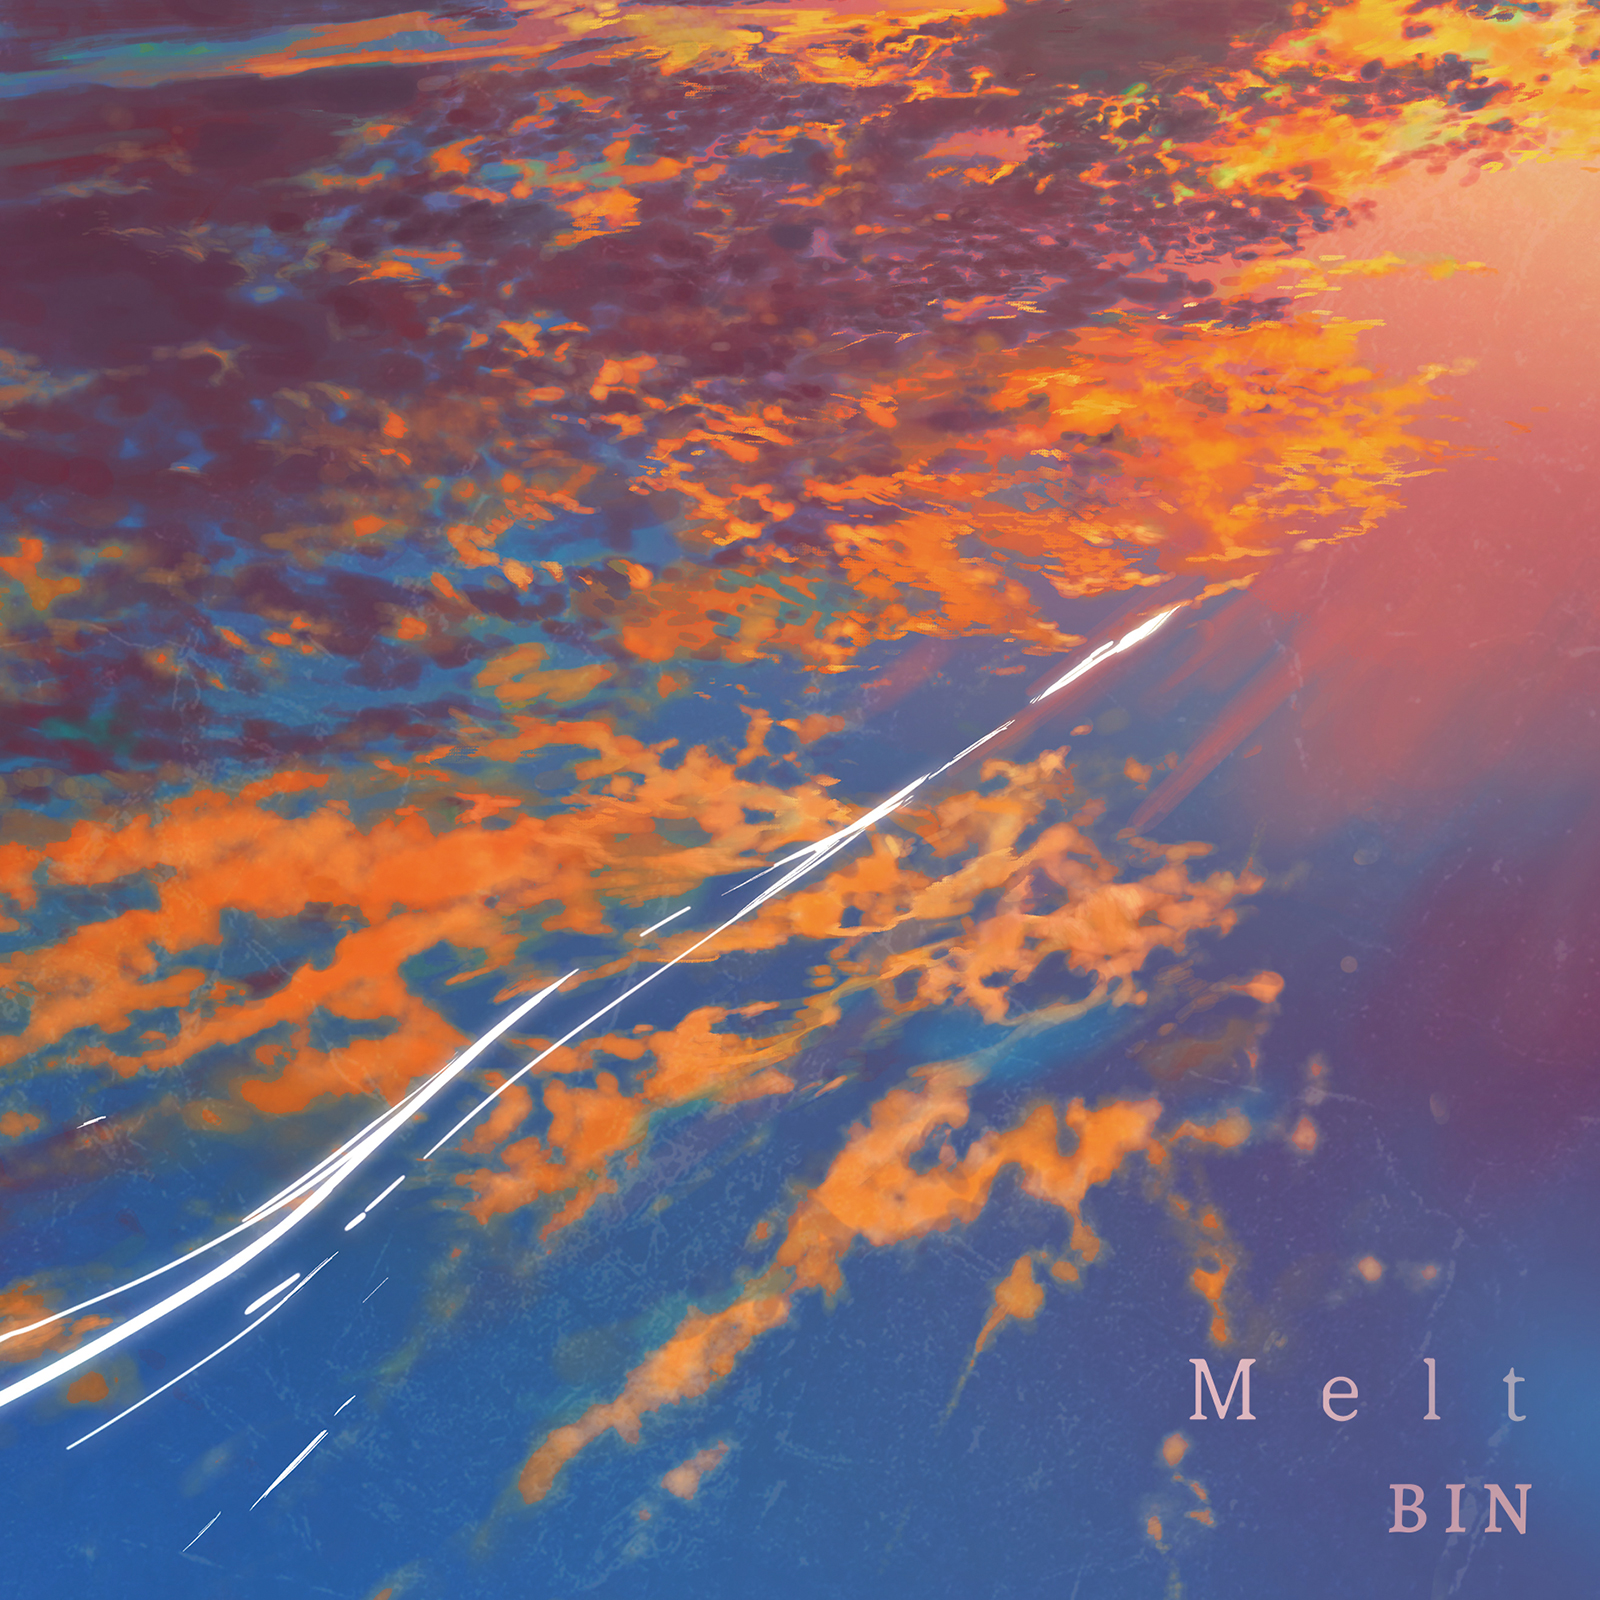 BIN 2nd Album "Melt" Normal Edition (CD Only) Release on February 28th